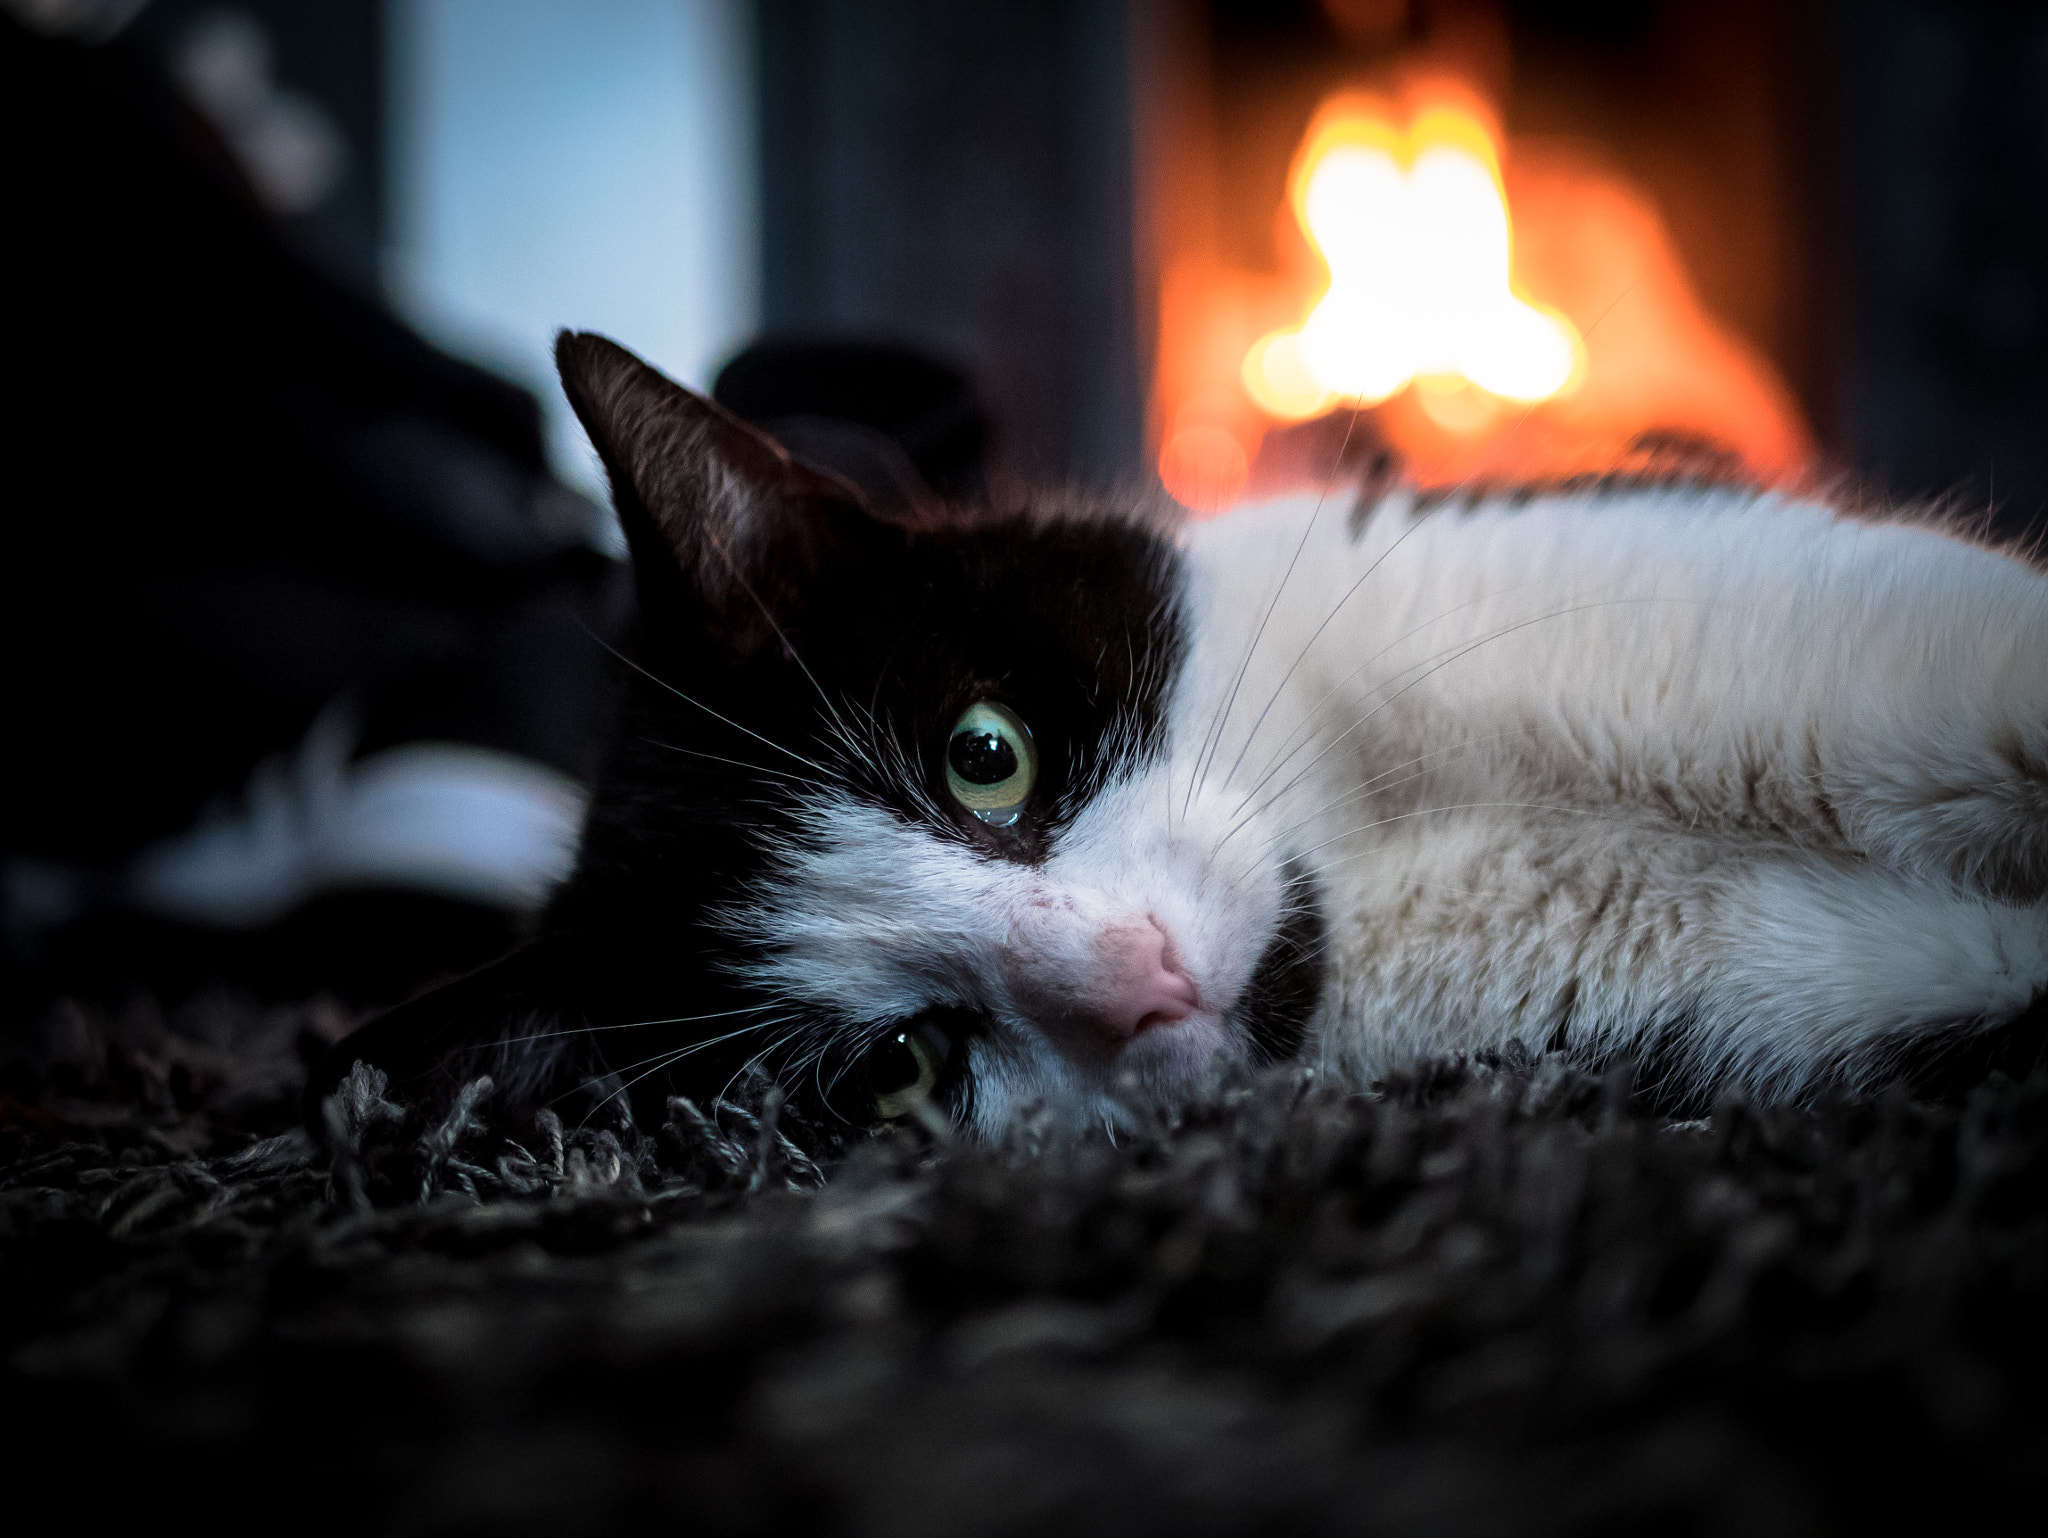 Panasonic Lumix DMC-GX85 (Lumix DMC-GX80 / Lumix DMC-GX7 Mark II) sample photo. Lazy day by the fire photography